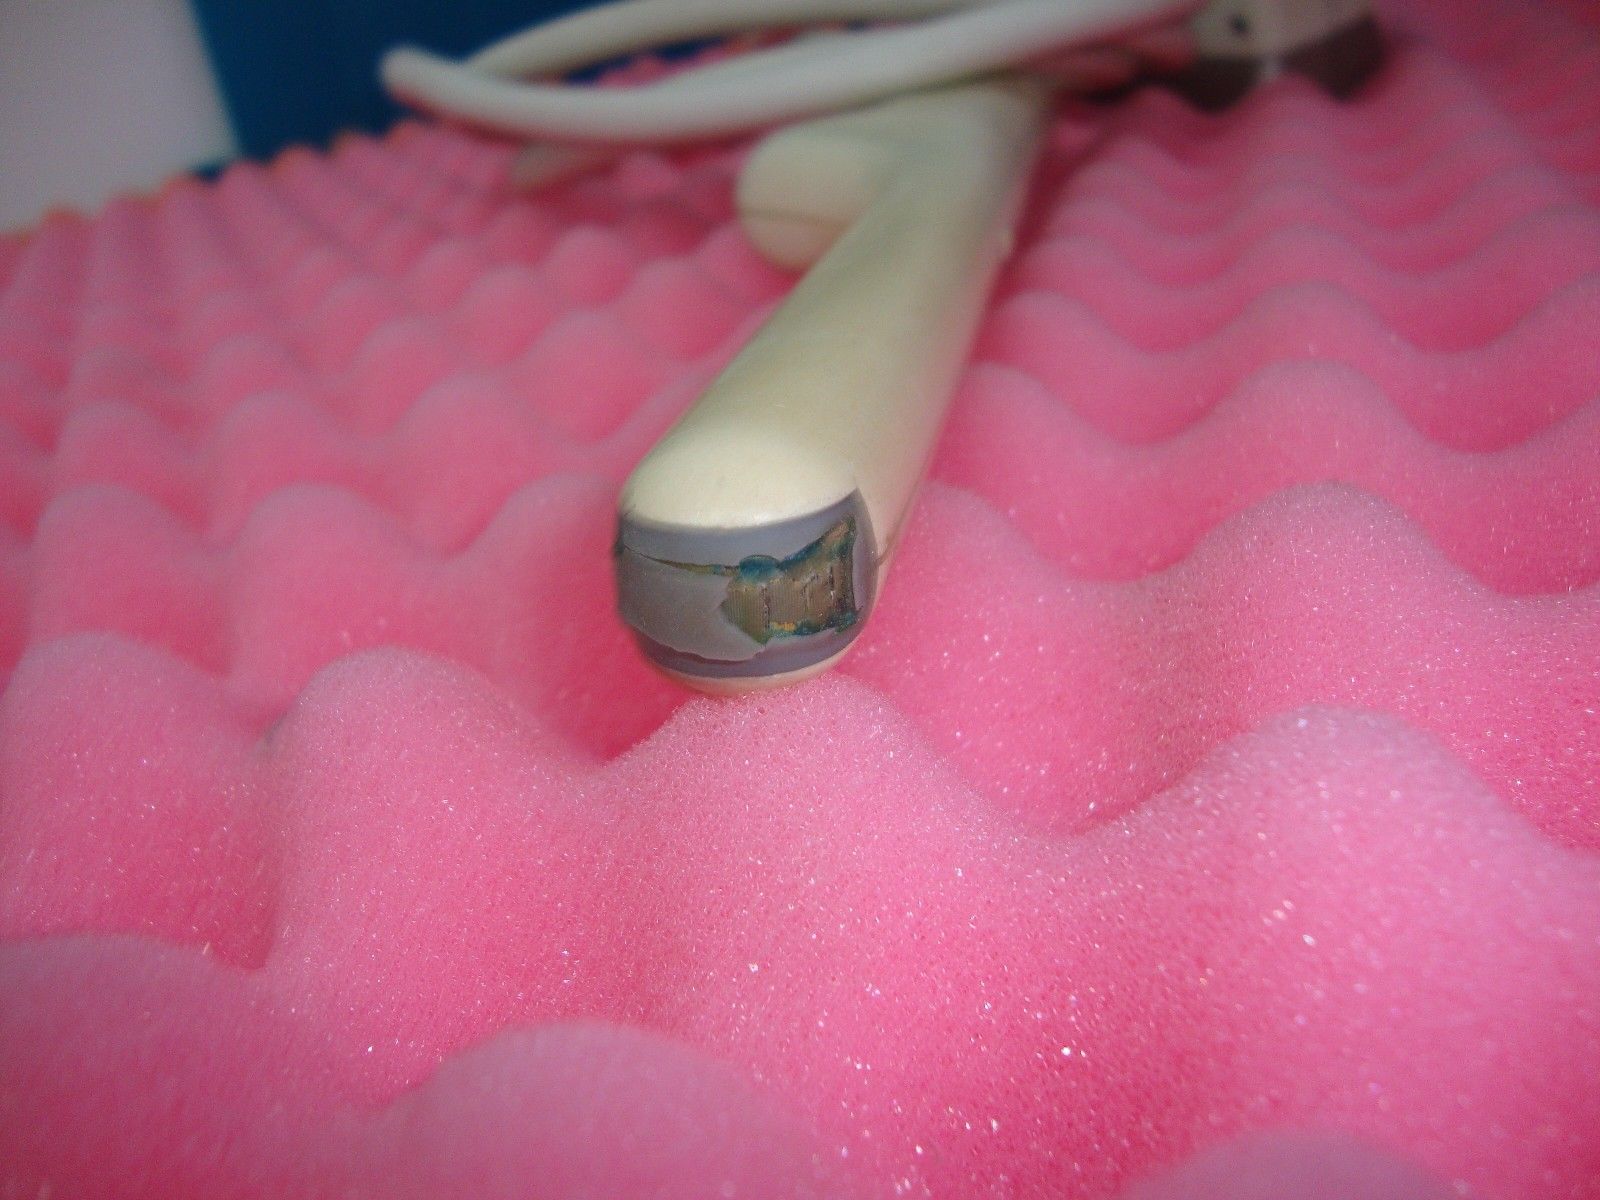 a close up of a probe head on a pink surface